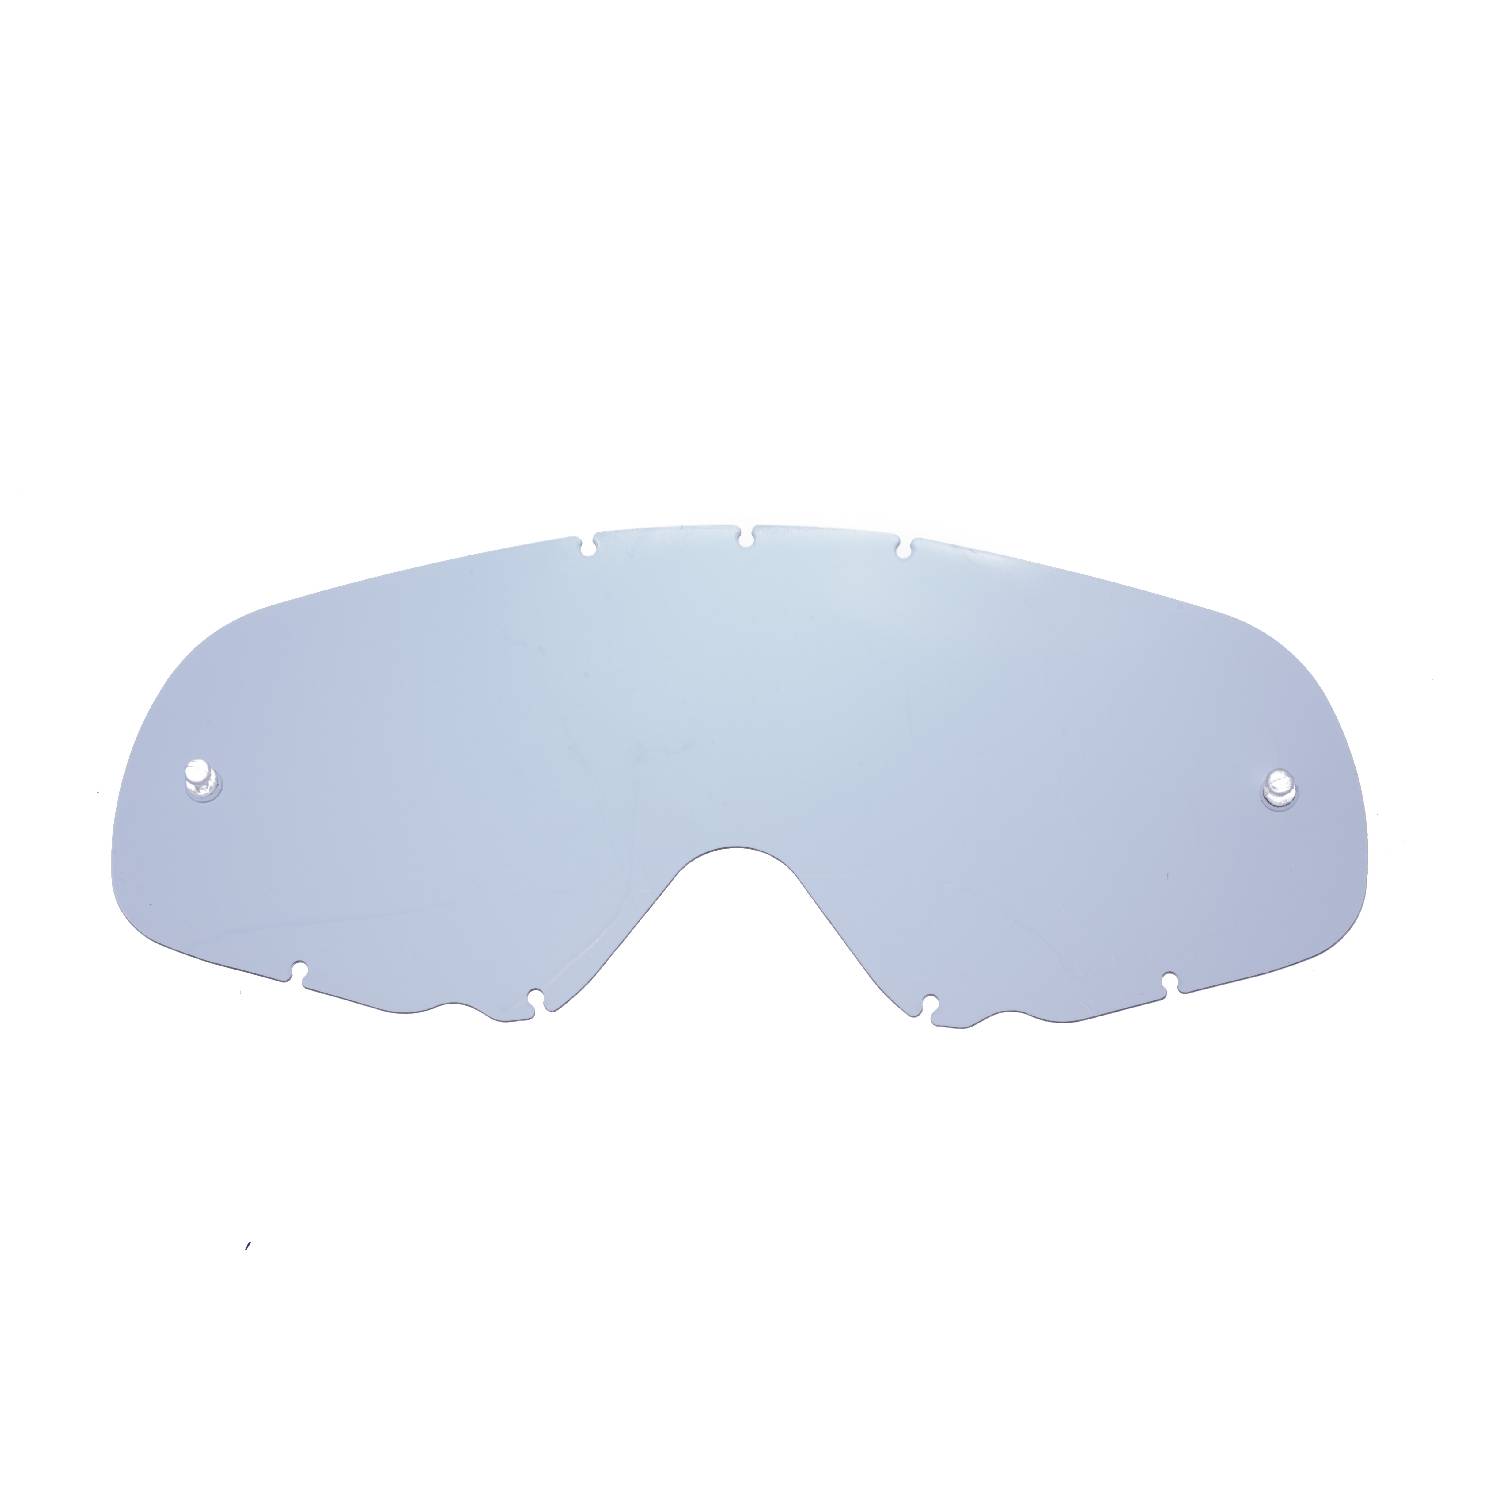 smokey replacement lenses  compatible for Oakley Crowbar goggle